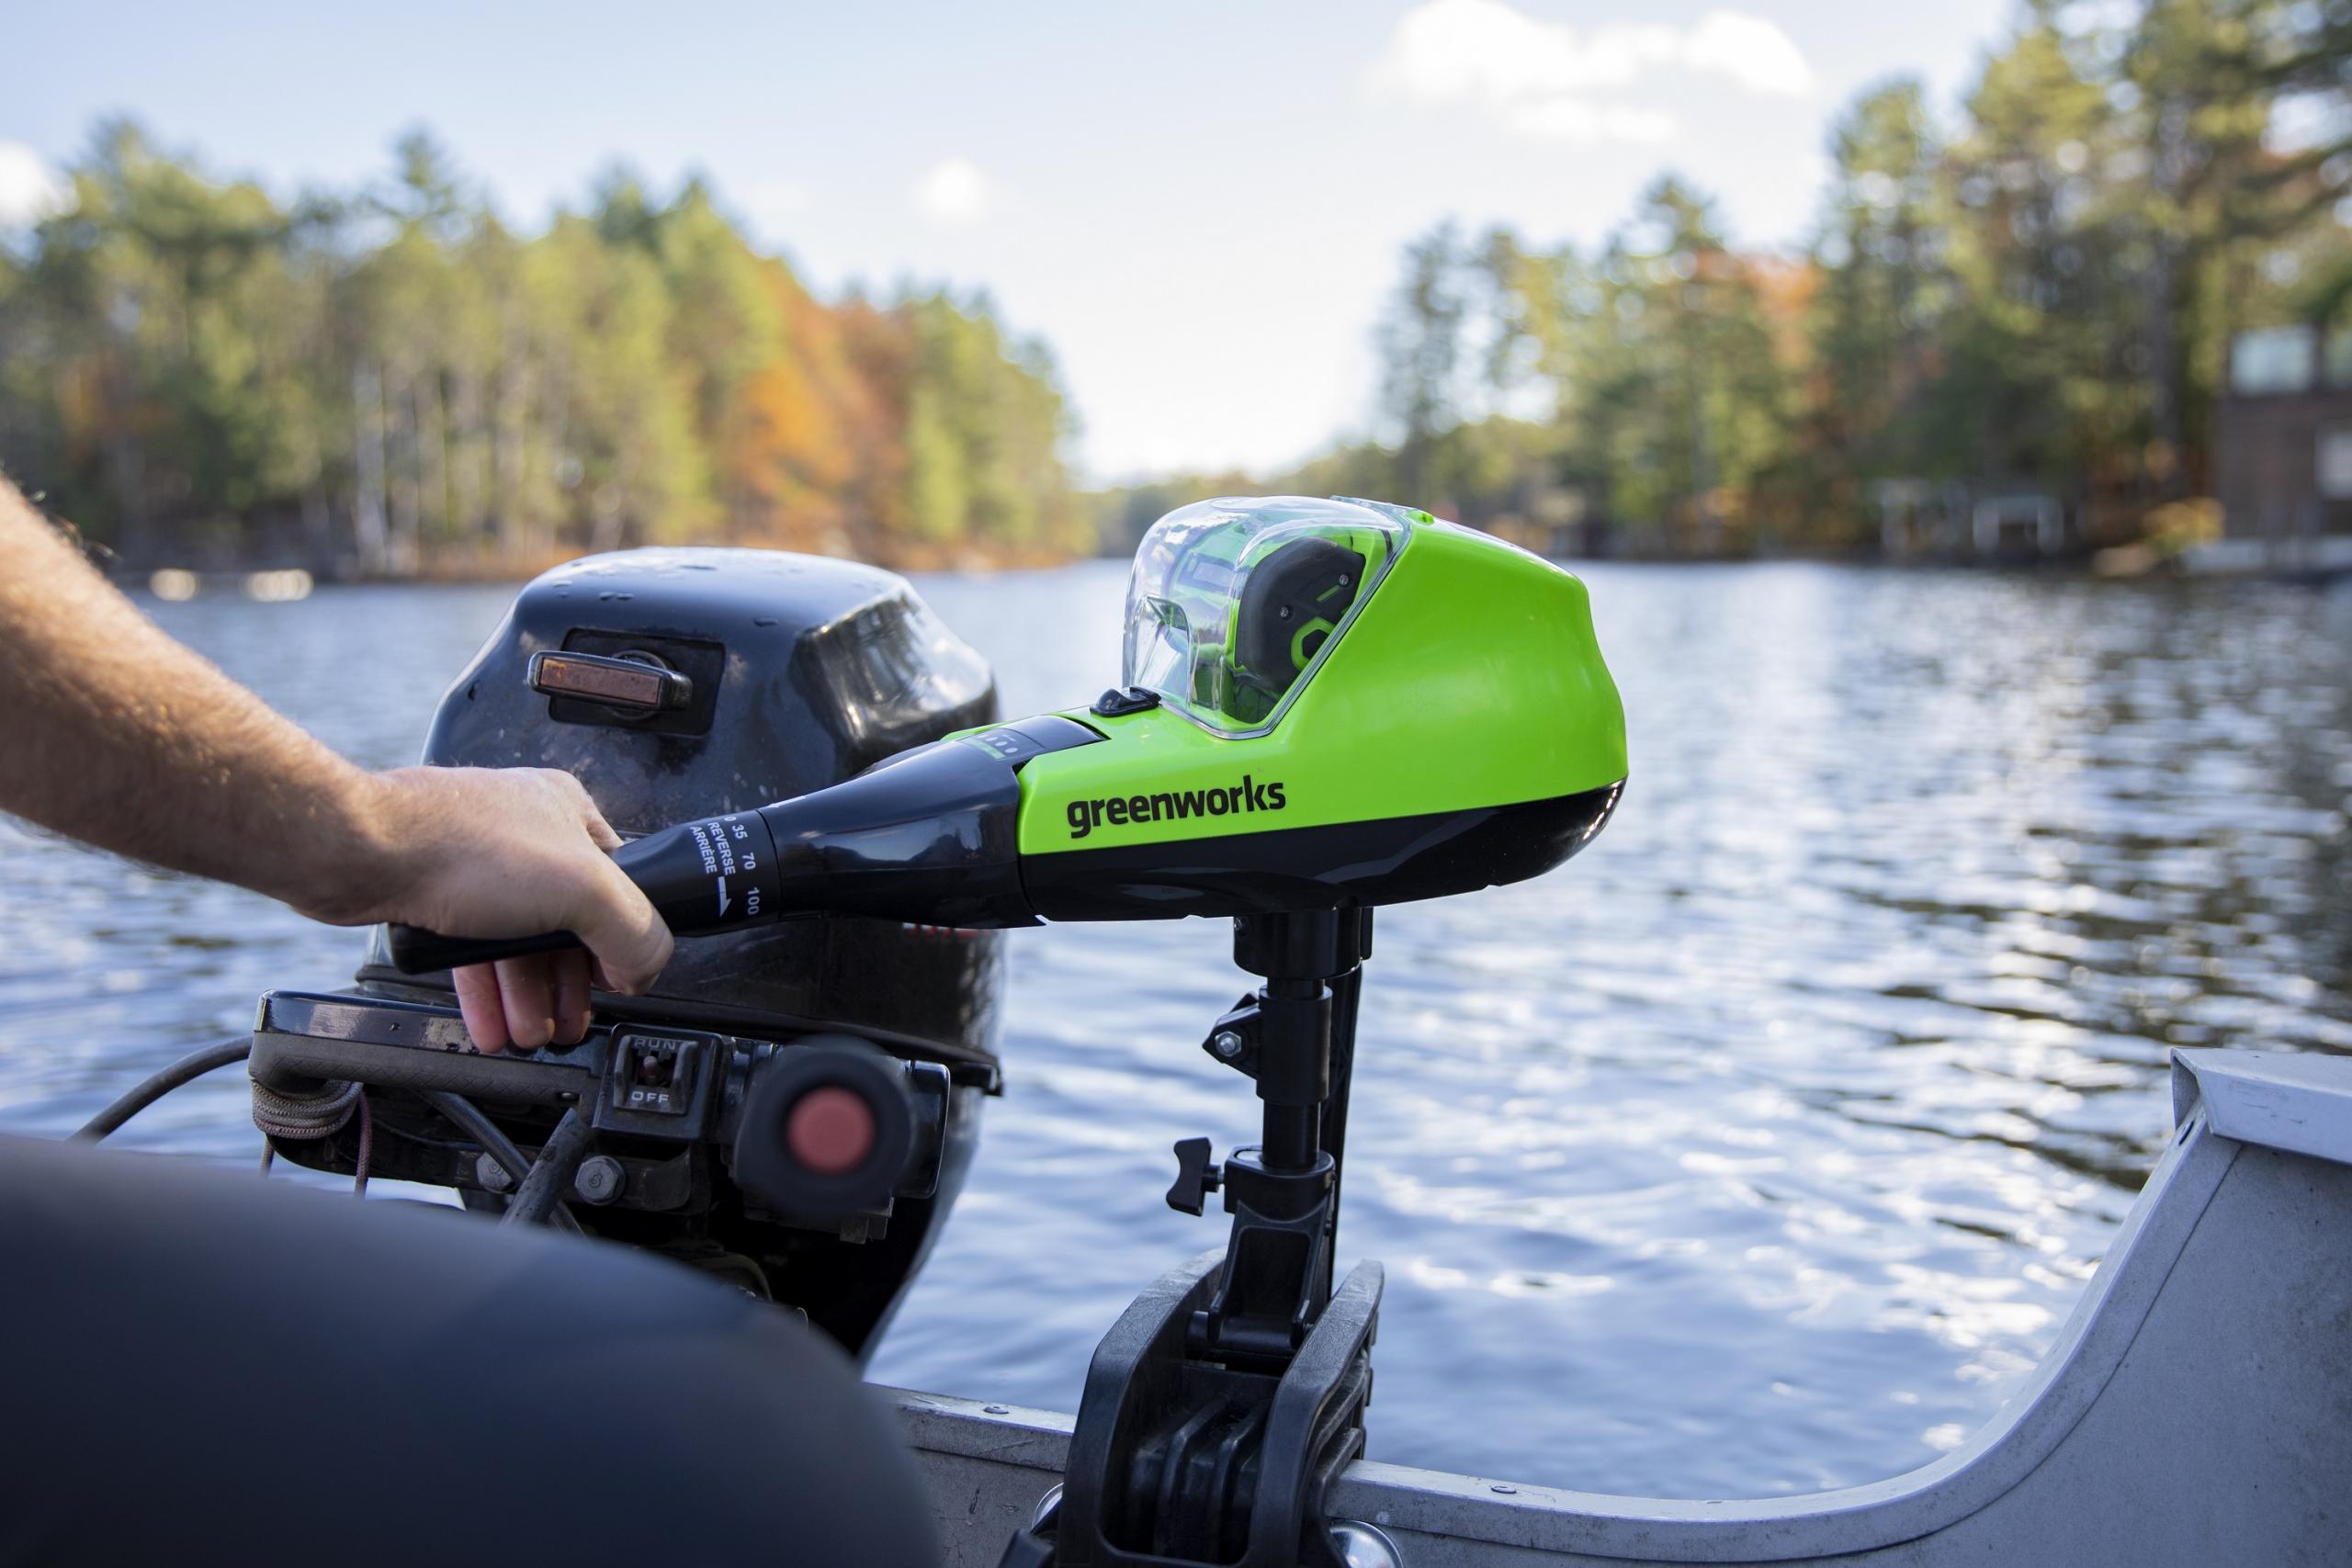 Buy 40V 32lb Trolling Motor With 8 Propeller Speeds For Your Small Fishing  Boat - The DailyMoss